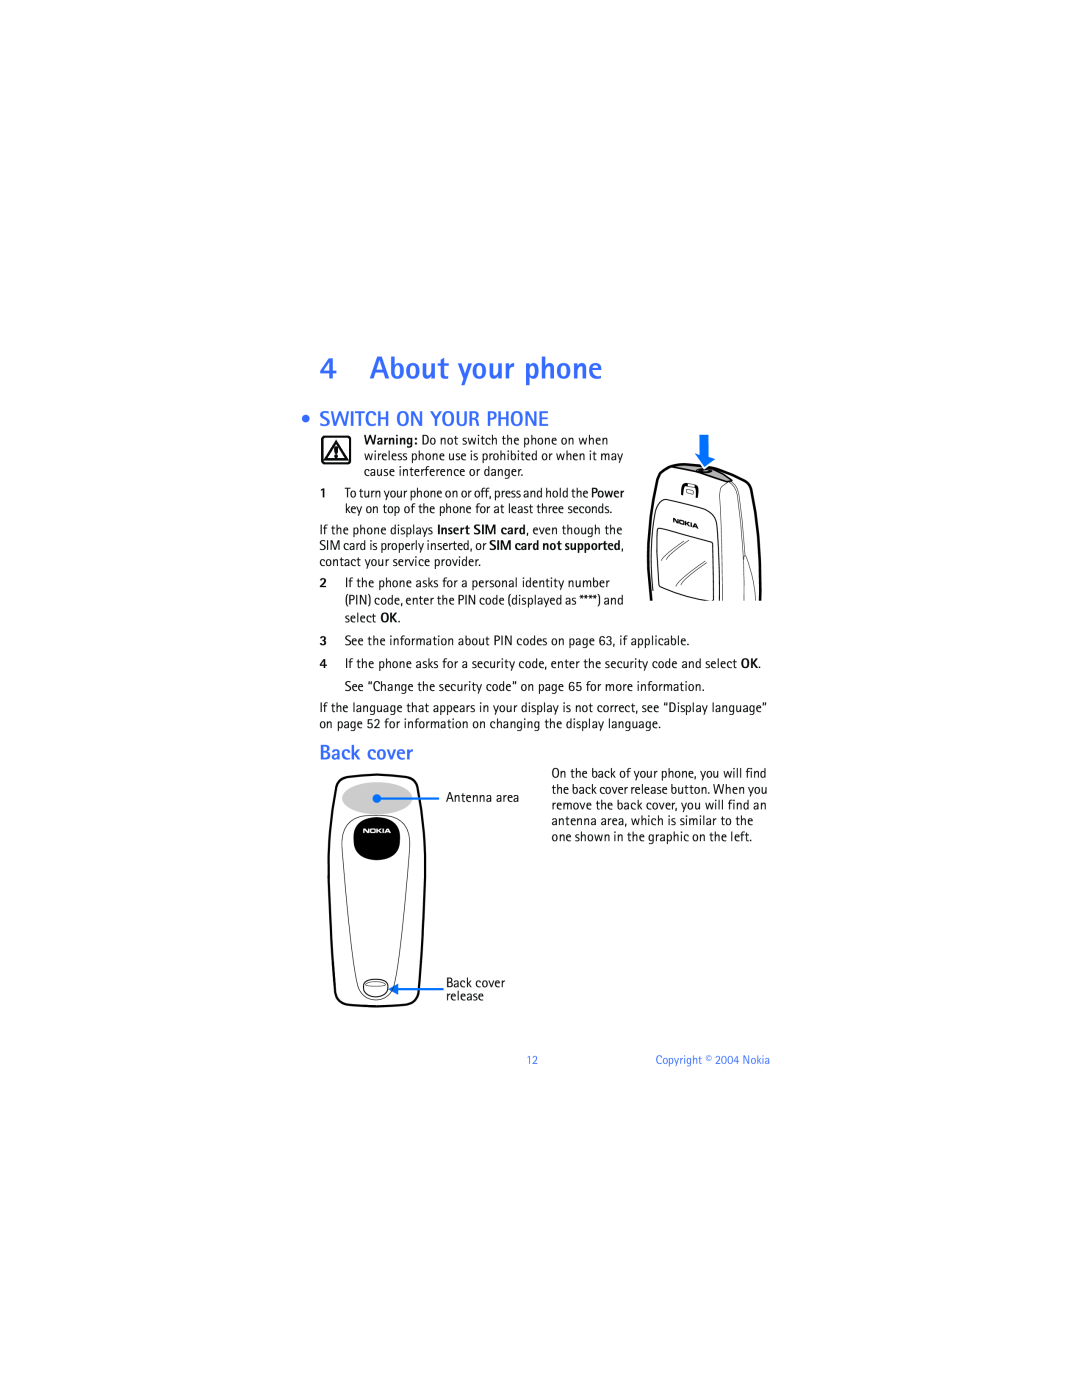 Nokia 6010 warranty About your phone, Switch On Your Phone, Back cover 